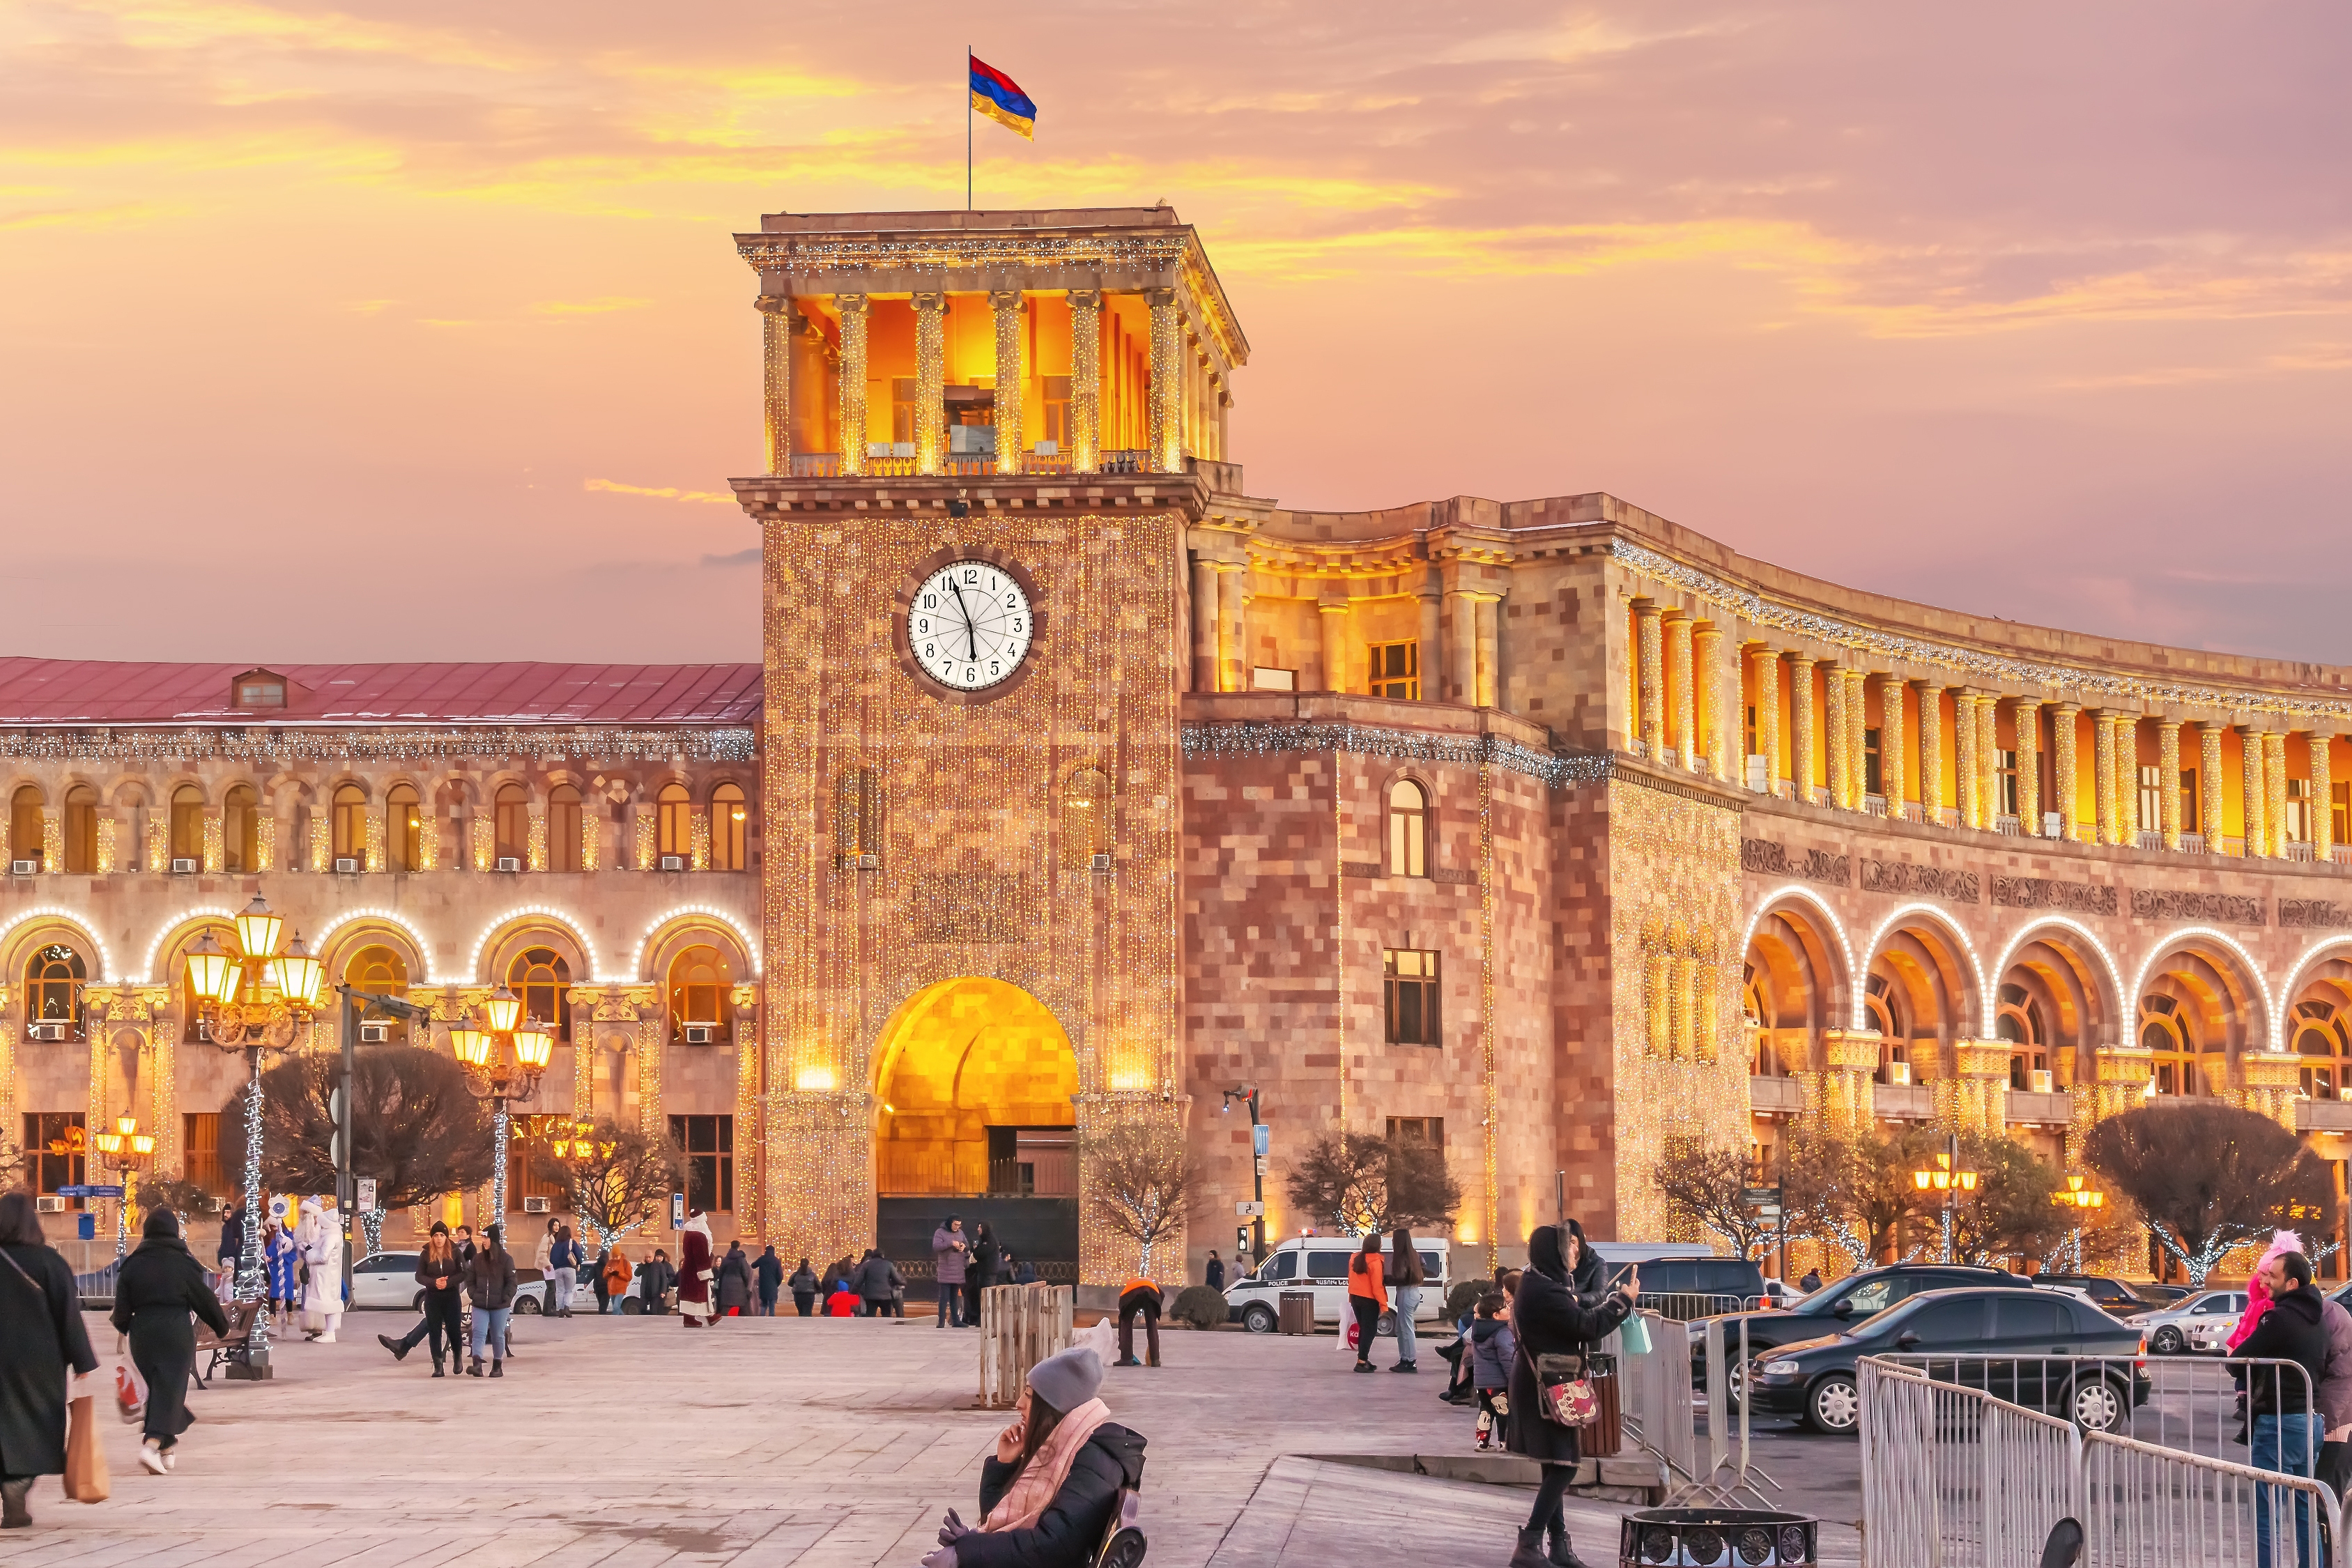 City to move to Armenia for permanent residence